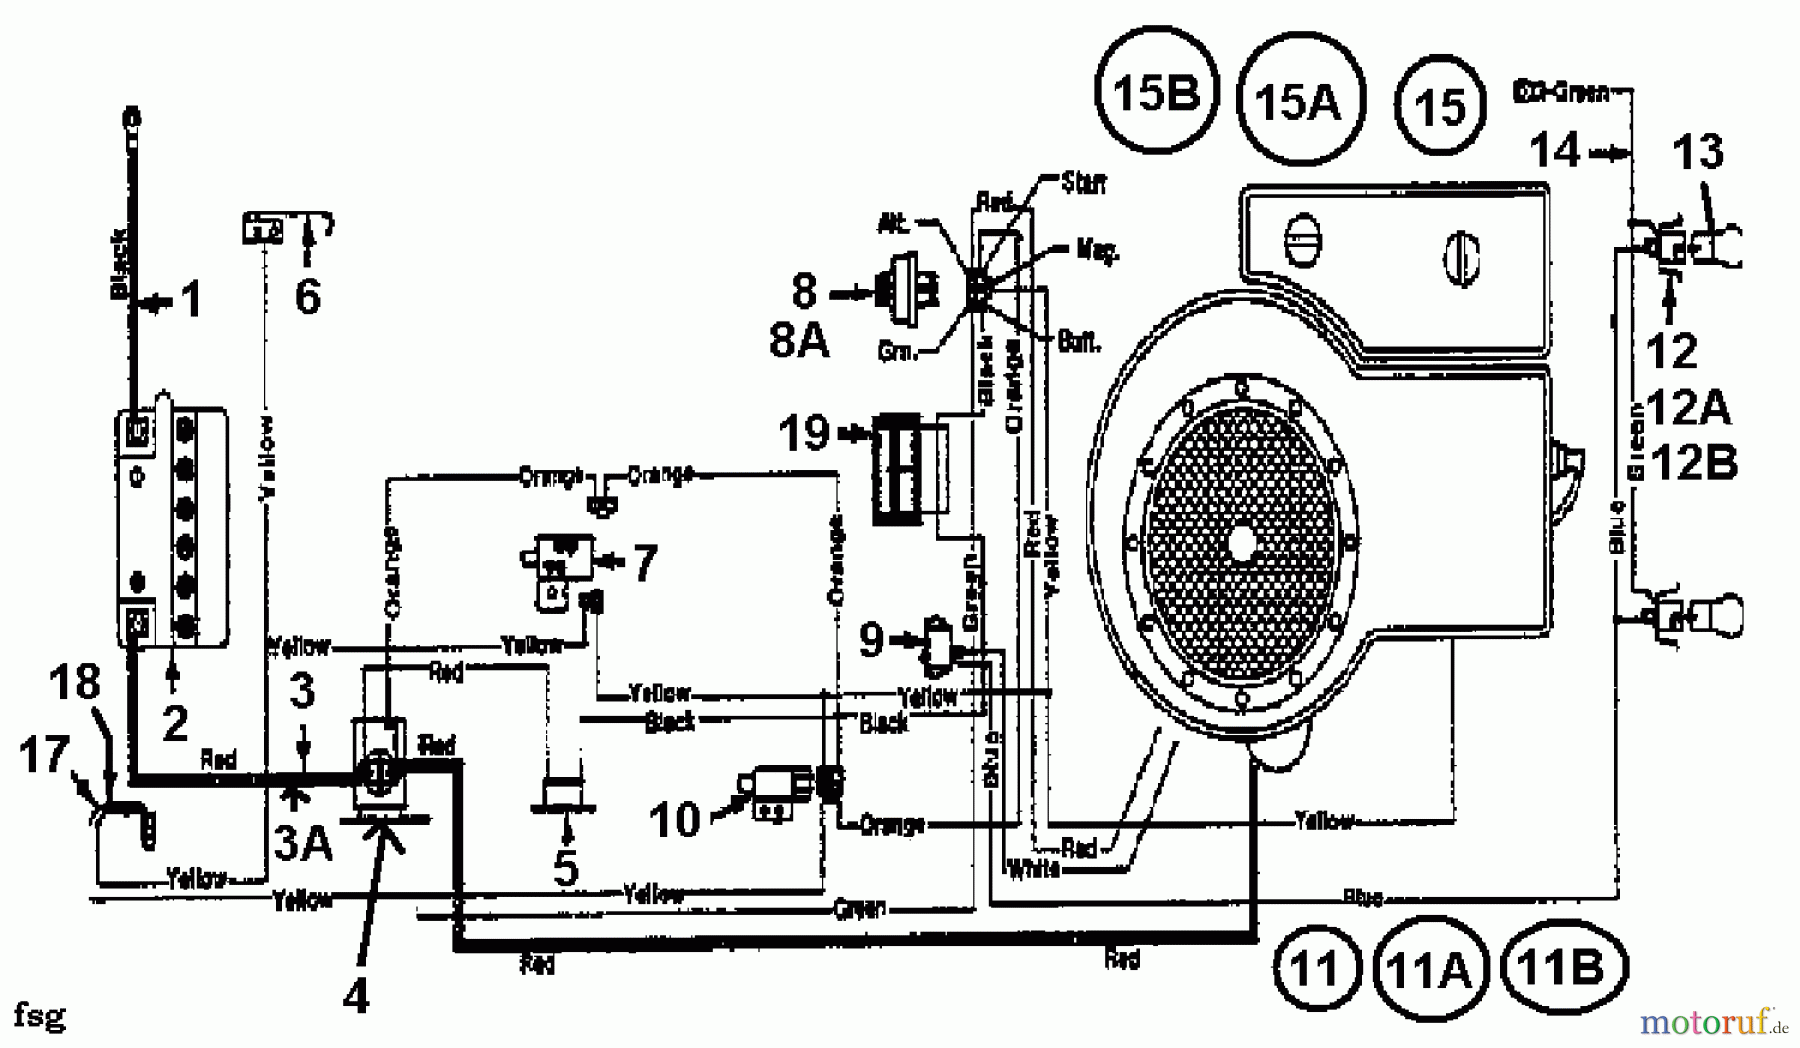  Florica Lawn tractors 12/91 132-450E638  (1992) Wiring diagram single cylinder